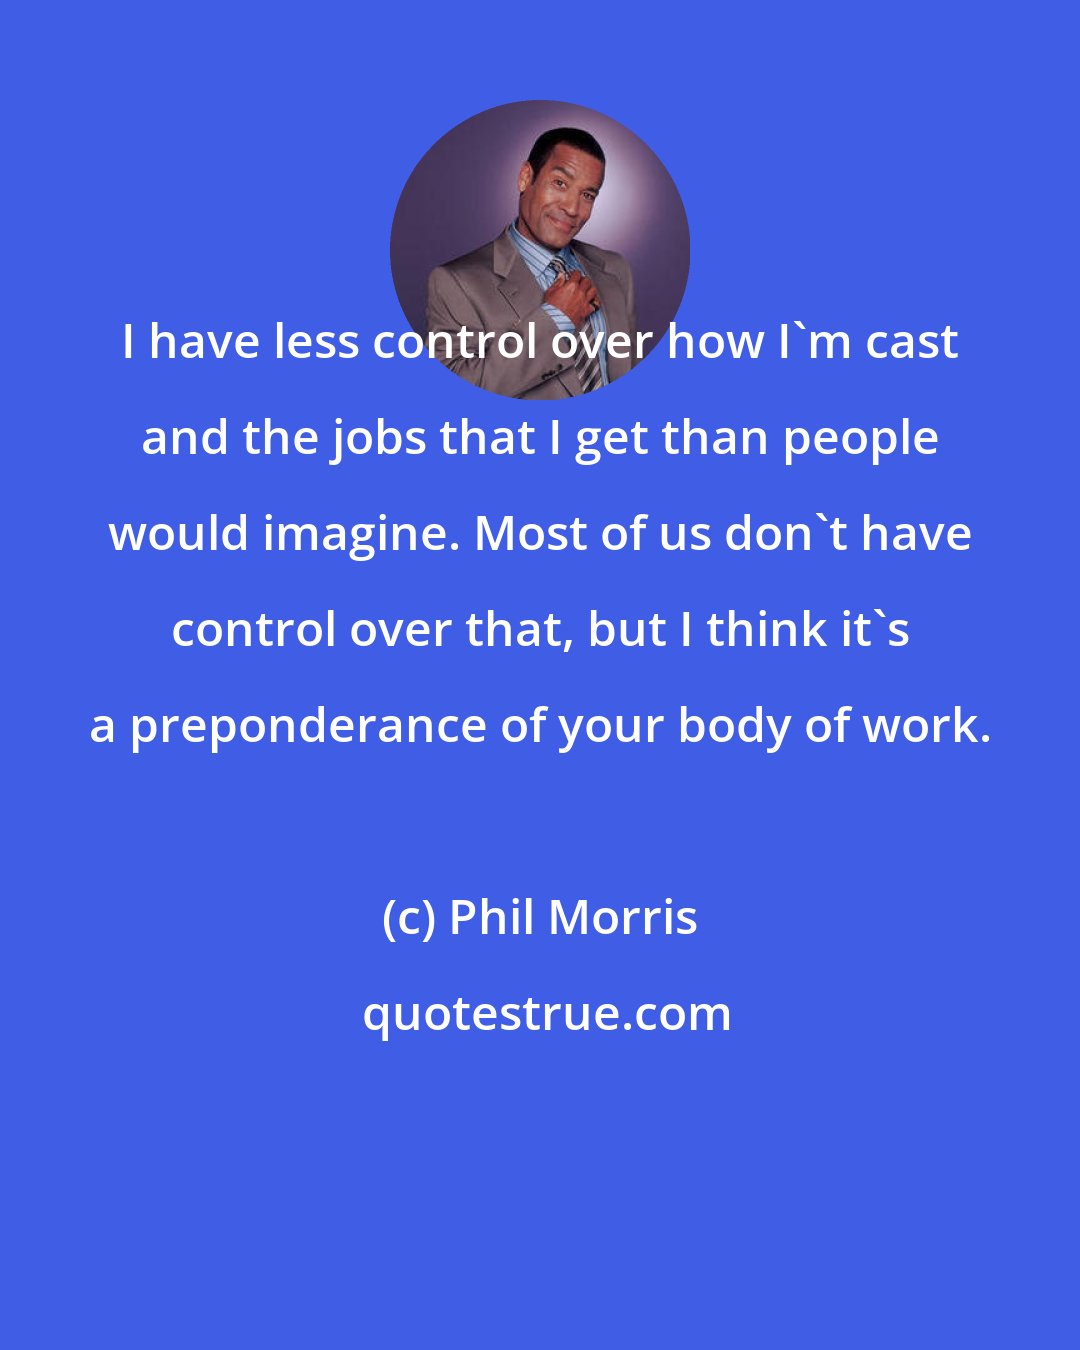 Phil Morris: I have less control over how I'm cast and the jobs that I get than people would imagine. Most of us don't have control over that, but I think it's a preponderance of your body of work.